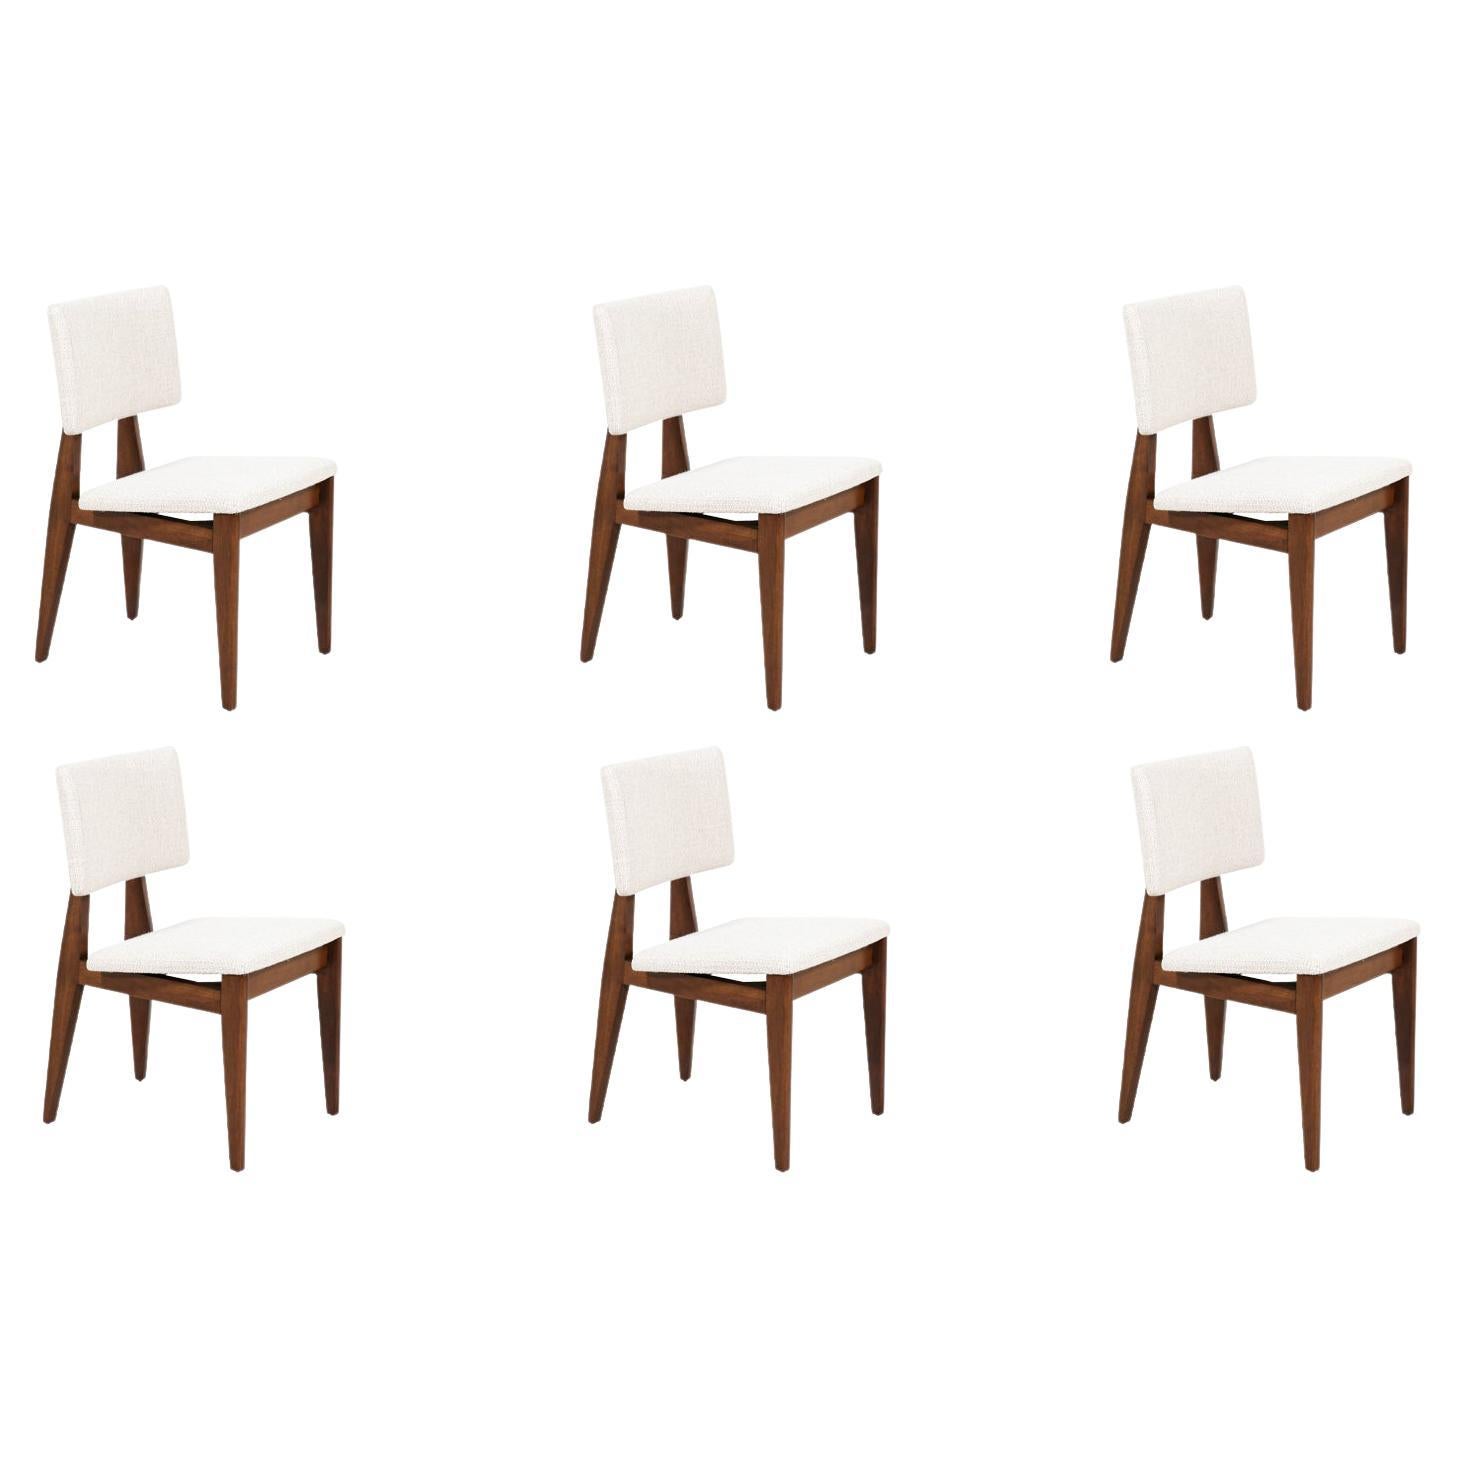 George Nelson Model 4668 Dining Chairs for Herman Miller